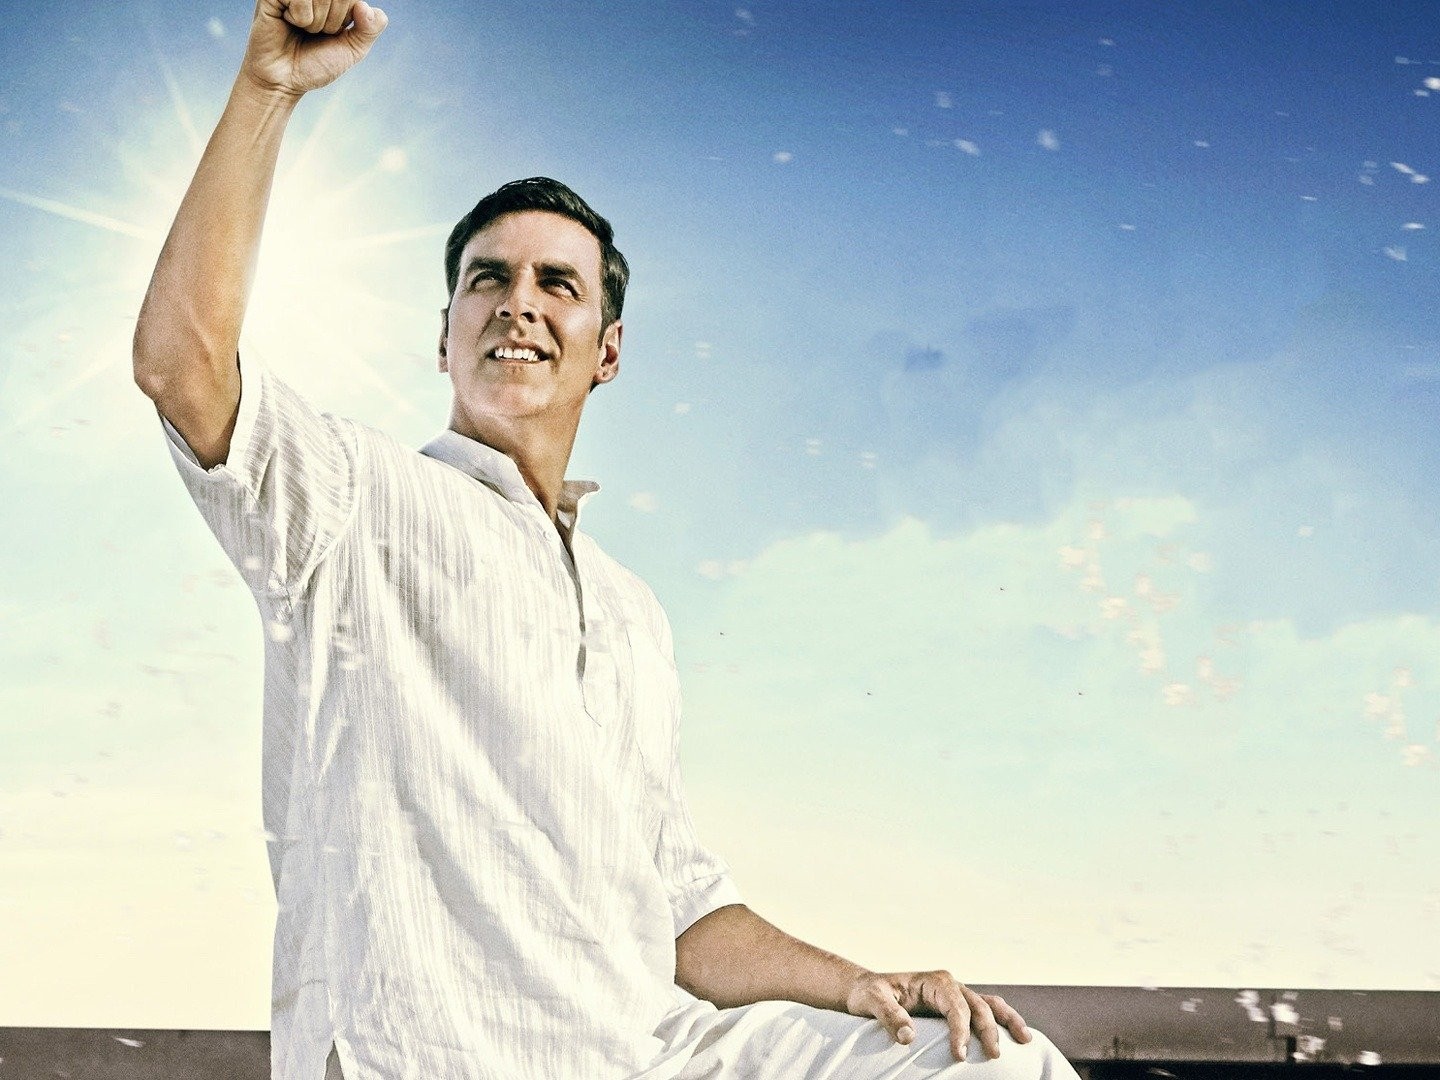 Padman Movie New Poster Has A Revolutionary Product In Actor's Hand |  StyleGods